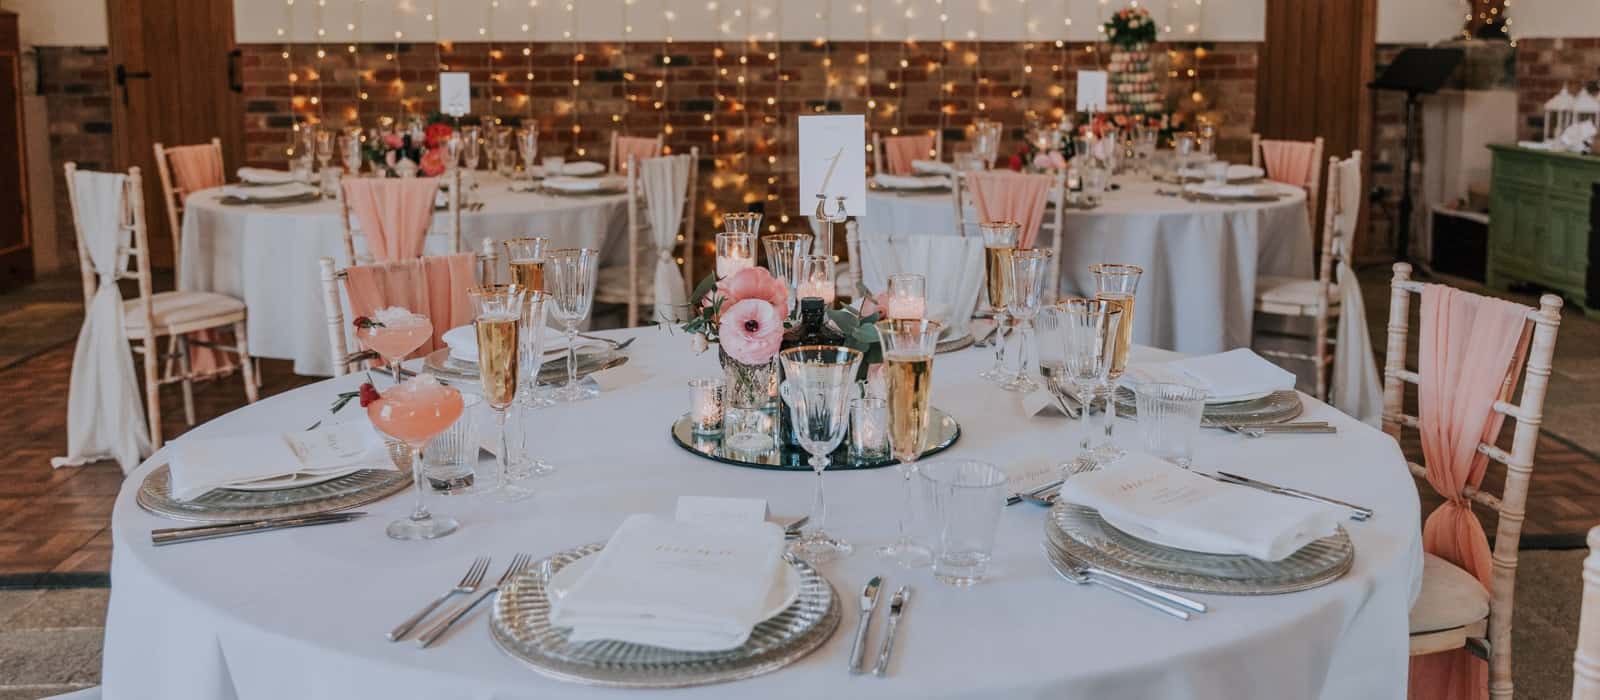 Hire Your Day wedding styling